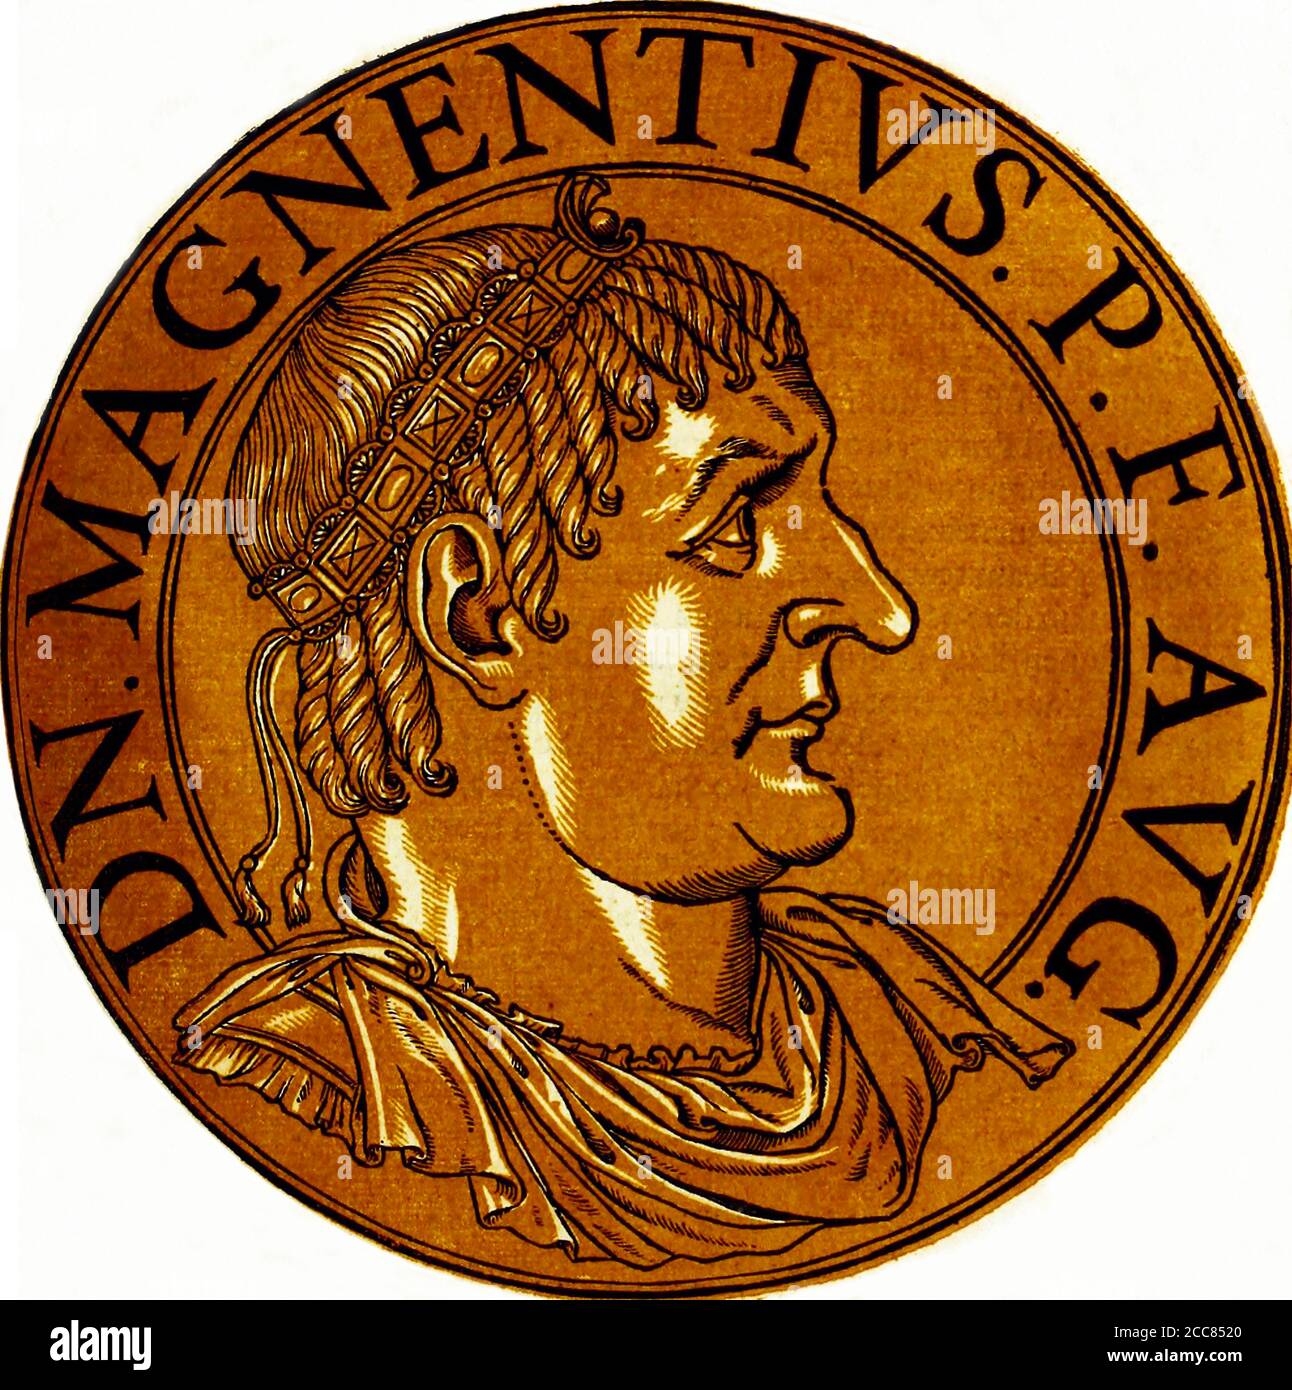 Italy: Magnentius (303-353), usurper emperor, from the book Icones imperatorvm romanorvm (Icons of Roman Emperors), Antwerp, c. 1645. Magnentius was born in Gaul and served as a commander in the Western Roman army. When the army grew dissatisfied with the rule of Emperor Constans, they proclaimed Magnentius as the new emperor in 350 and killed Constans. Stock Photo